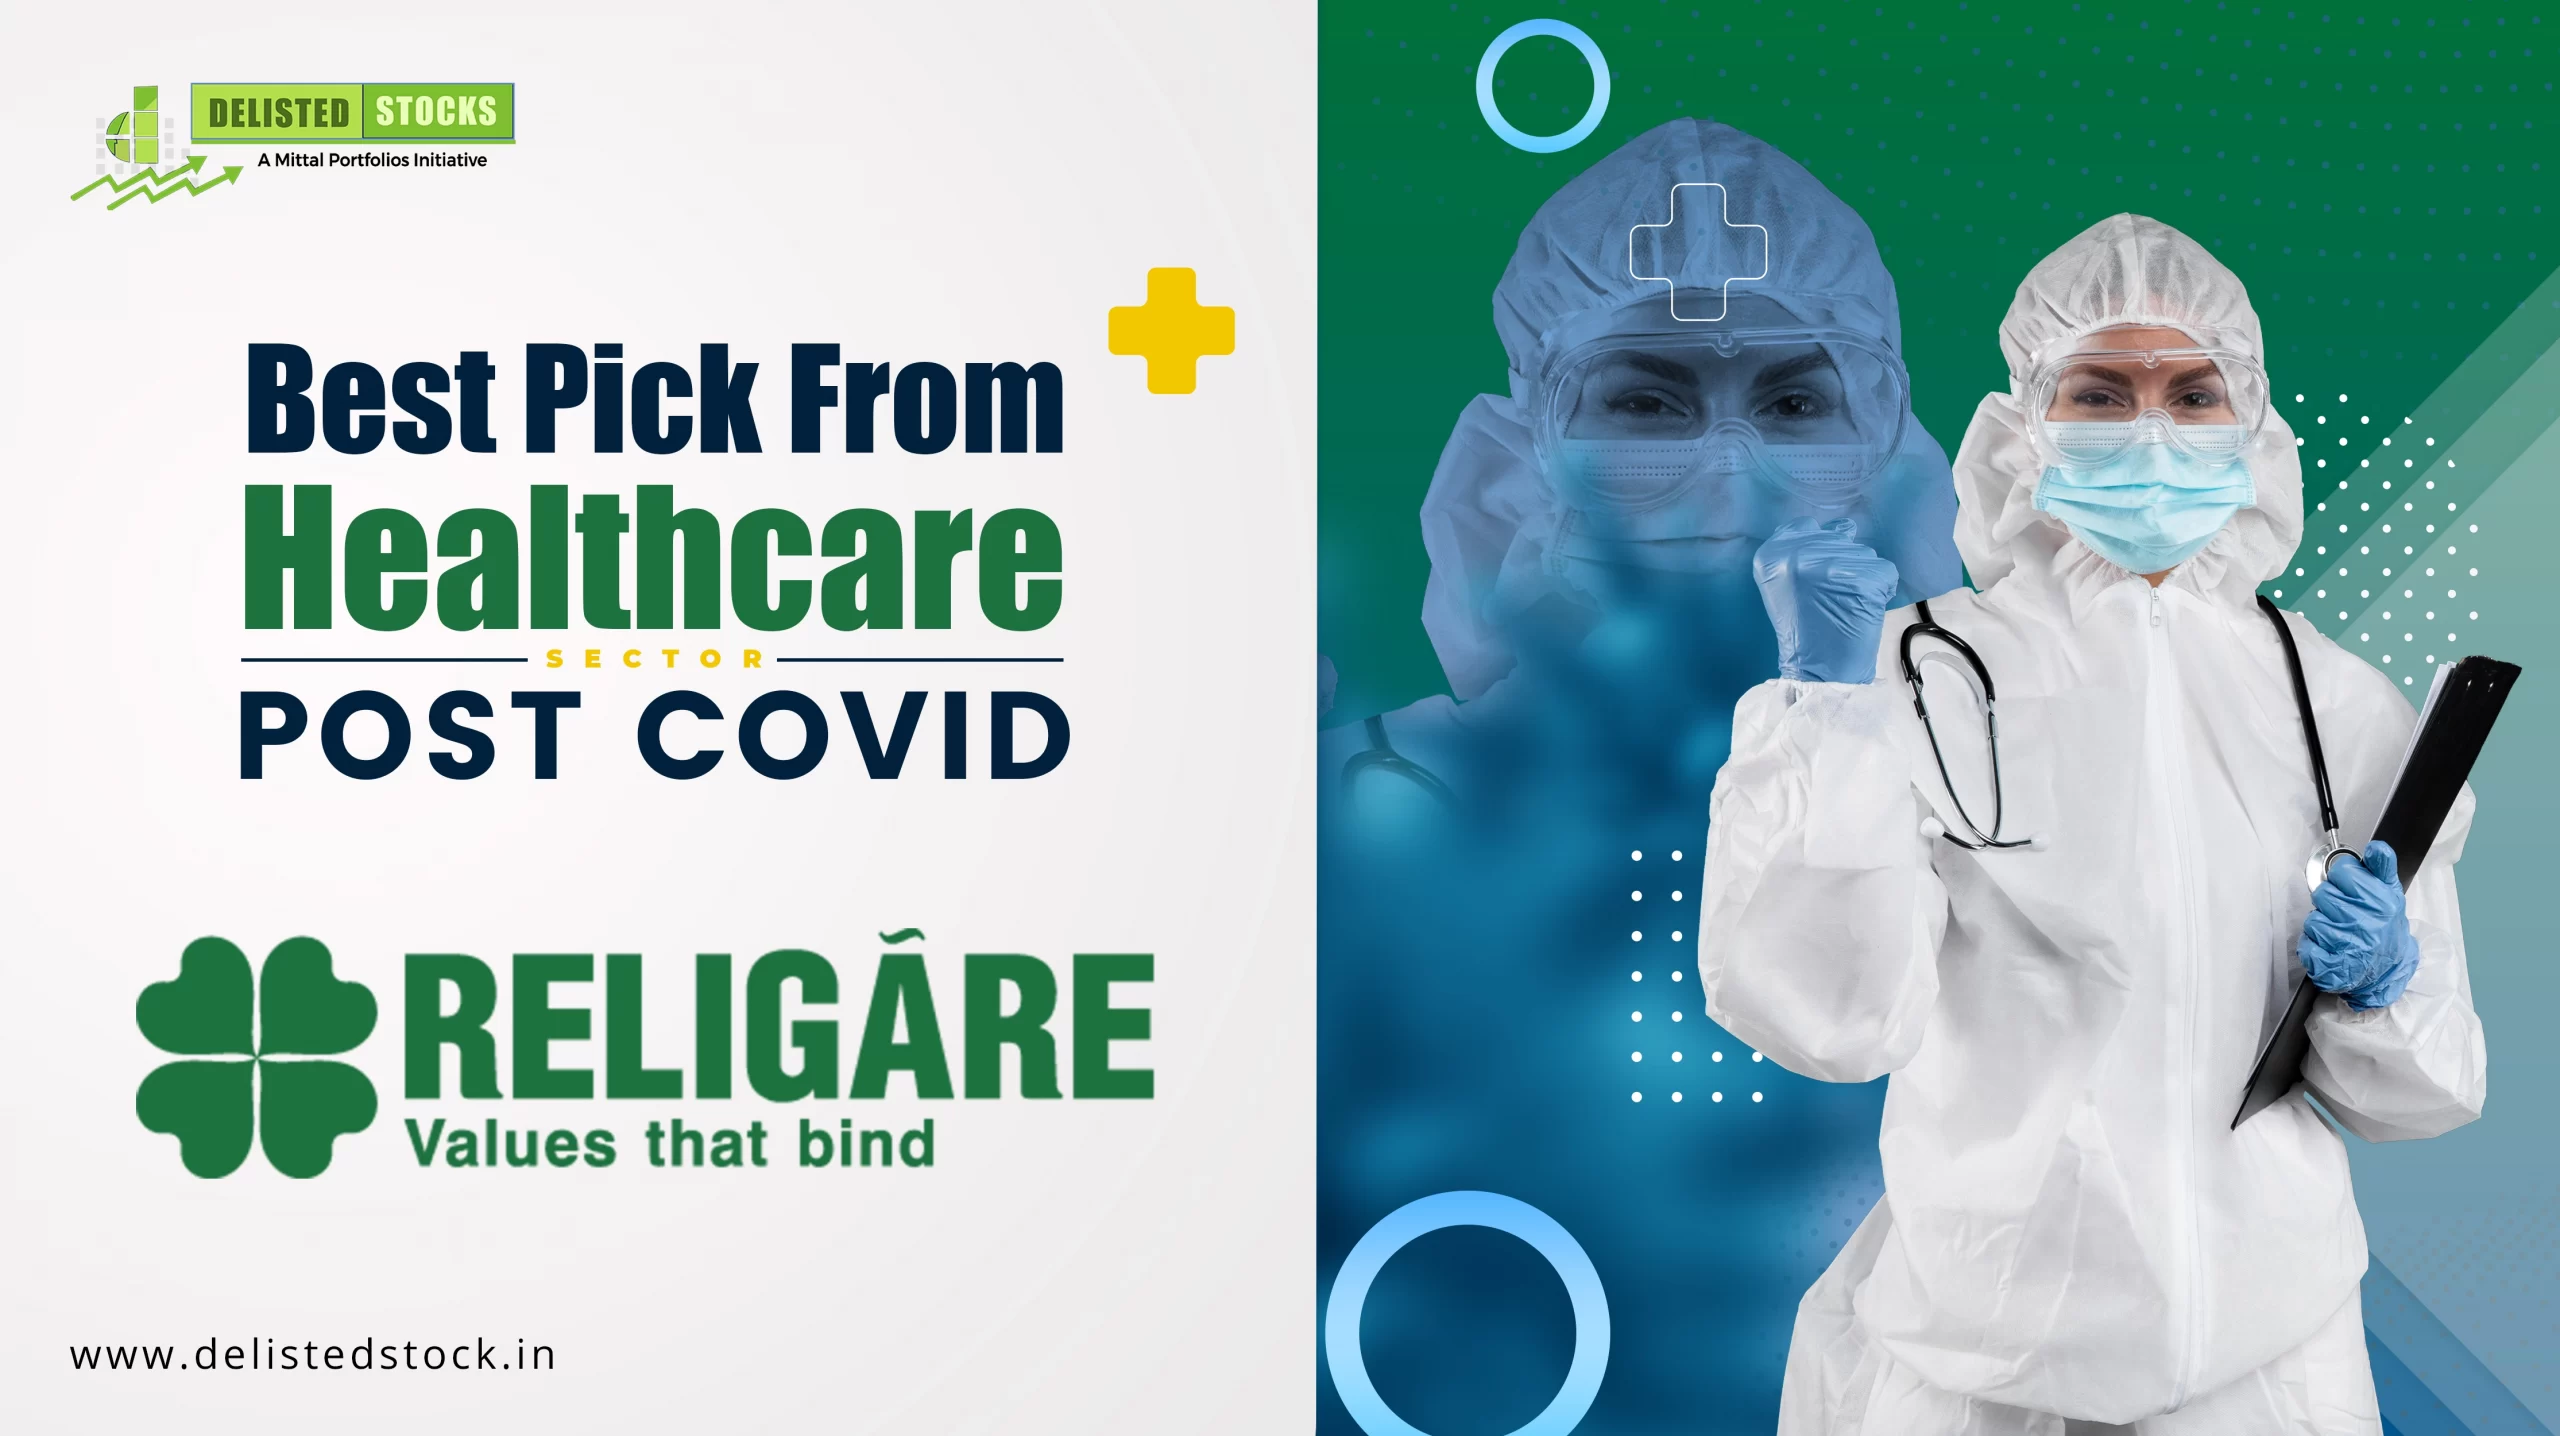 religare carehealth blog banner 1070x600 1 scaled